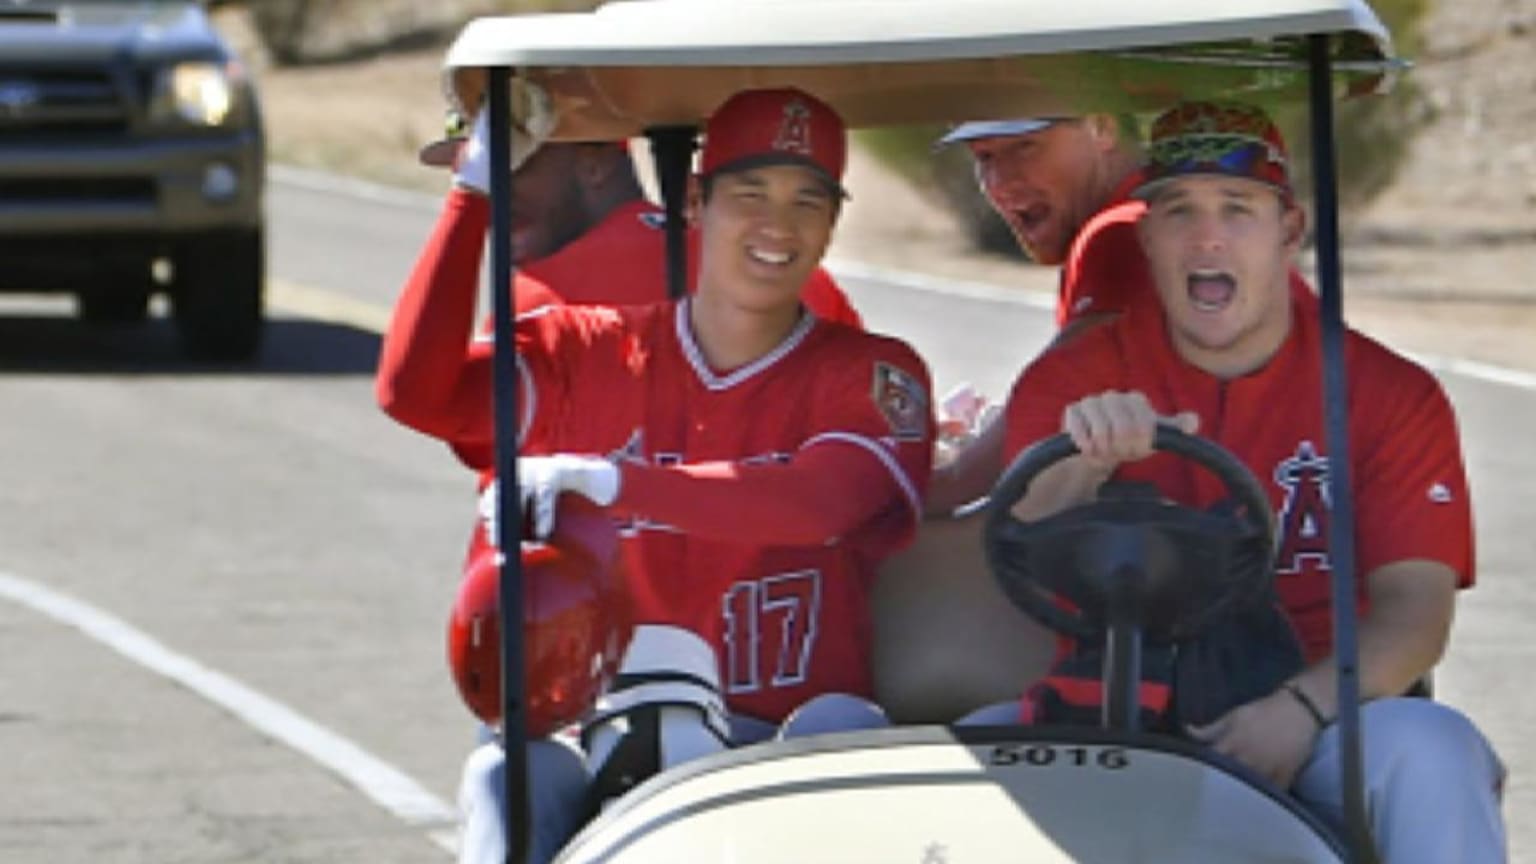 Ohtani & Trout's golf cart ride, 02/22/2018